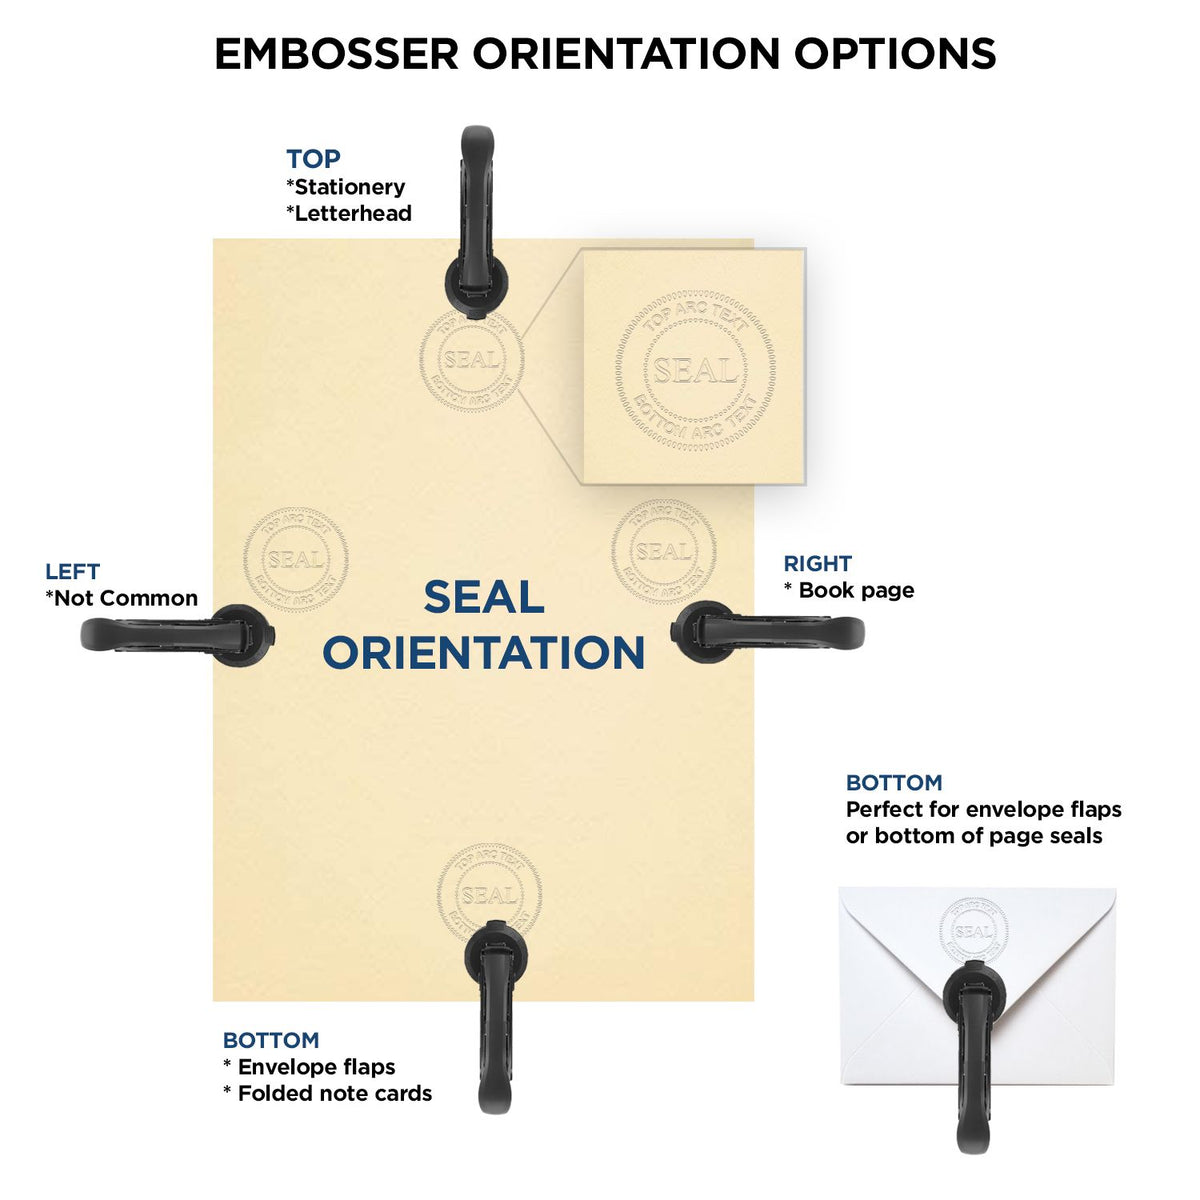 An infographic for the Arkansas Desk Surveyor Seal Embosser showing embosser orientation, this is showing examples of a top, bottom, right and left insert.